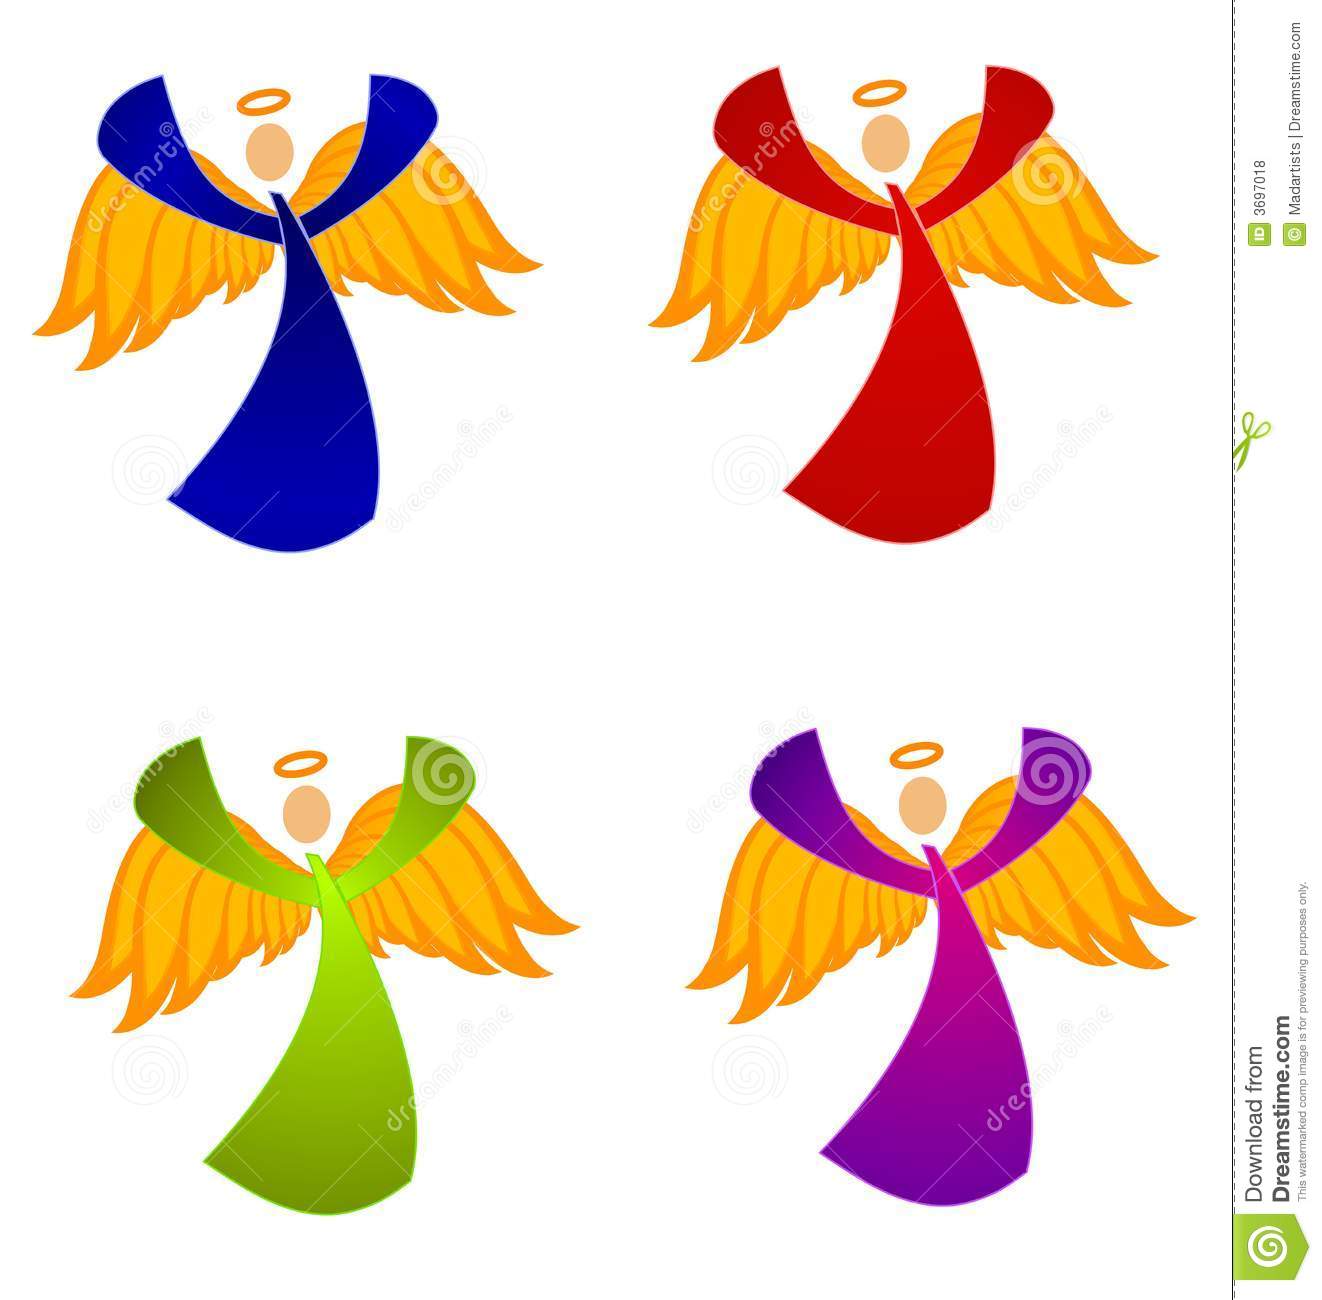 Variety Of Christmas Angels Clip Art Royalty Free Stock Photos   Image